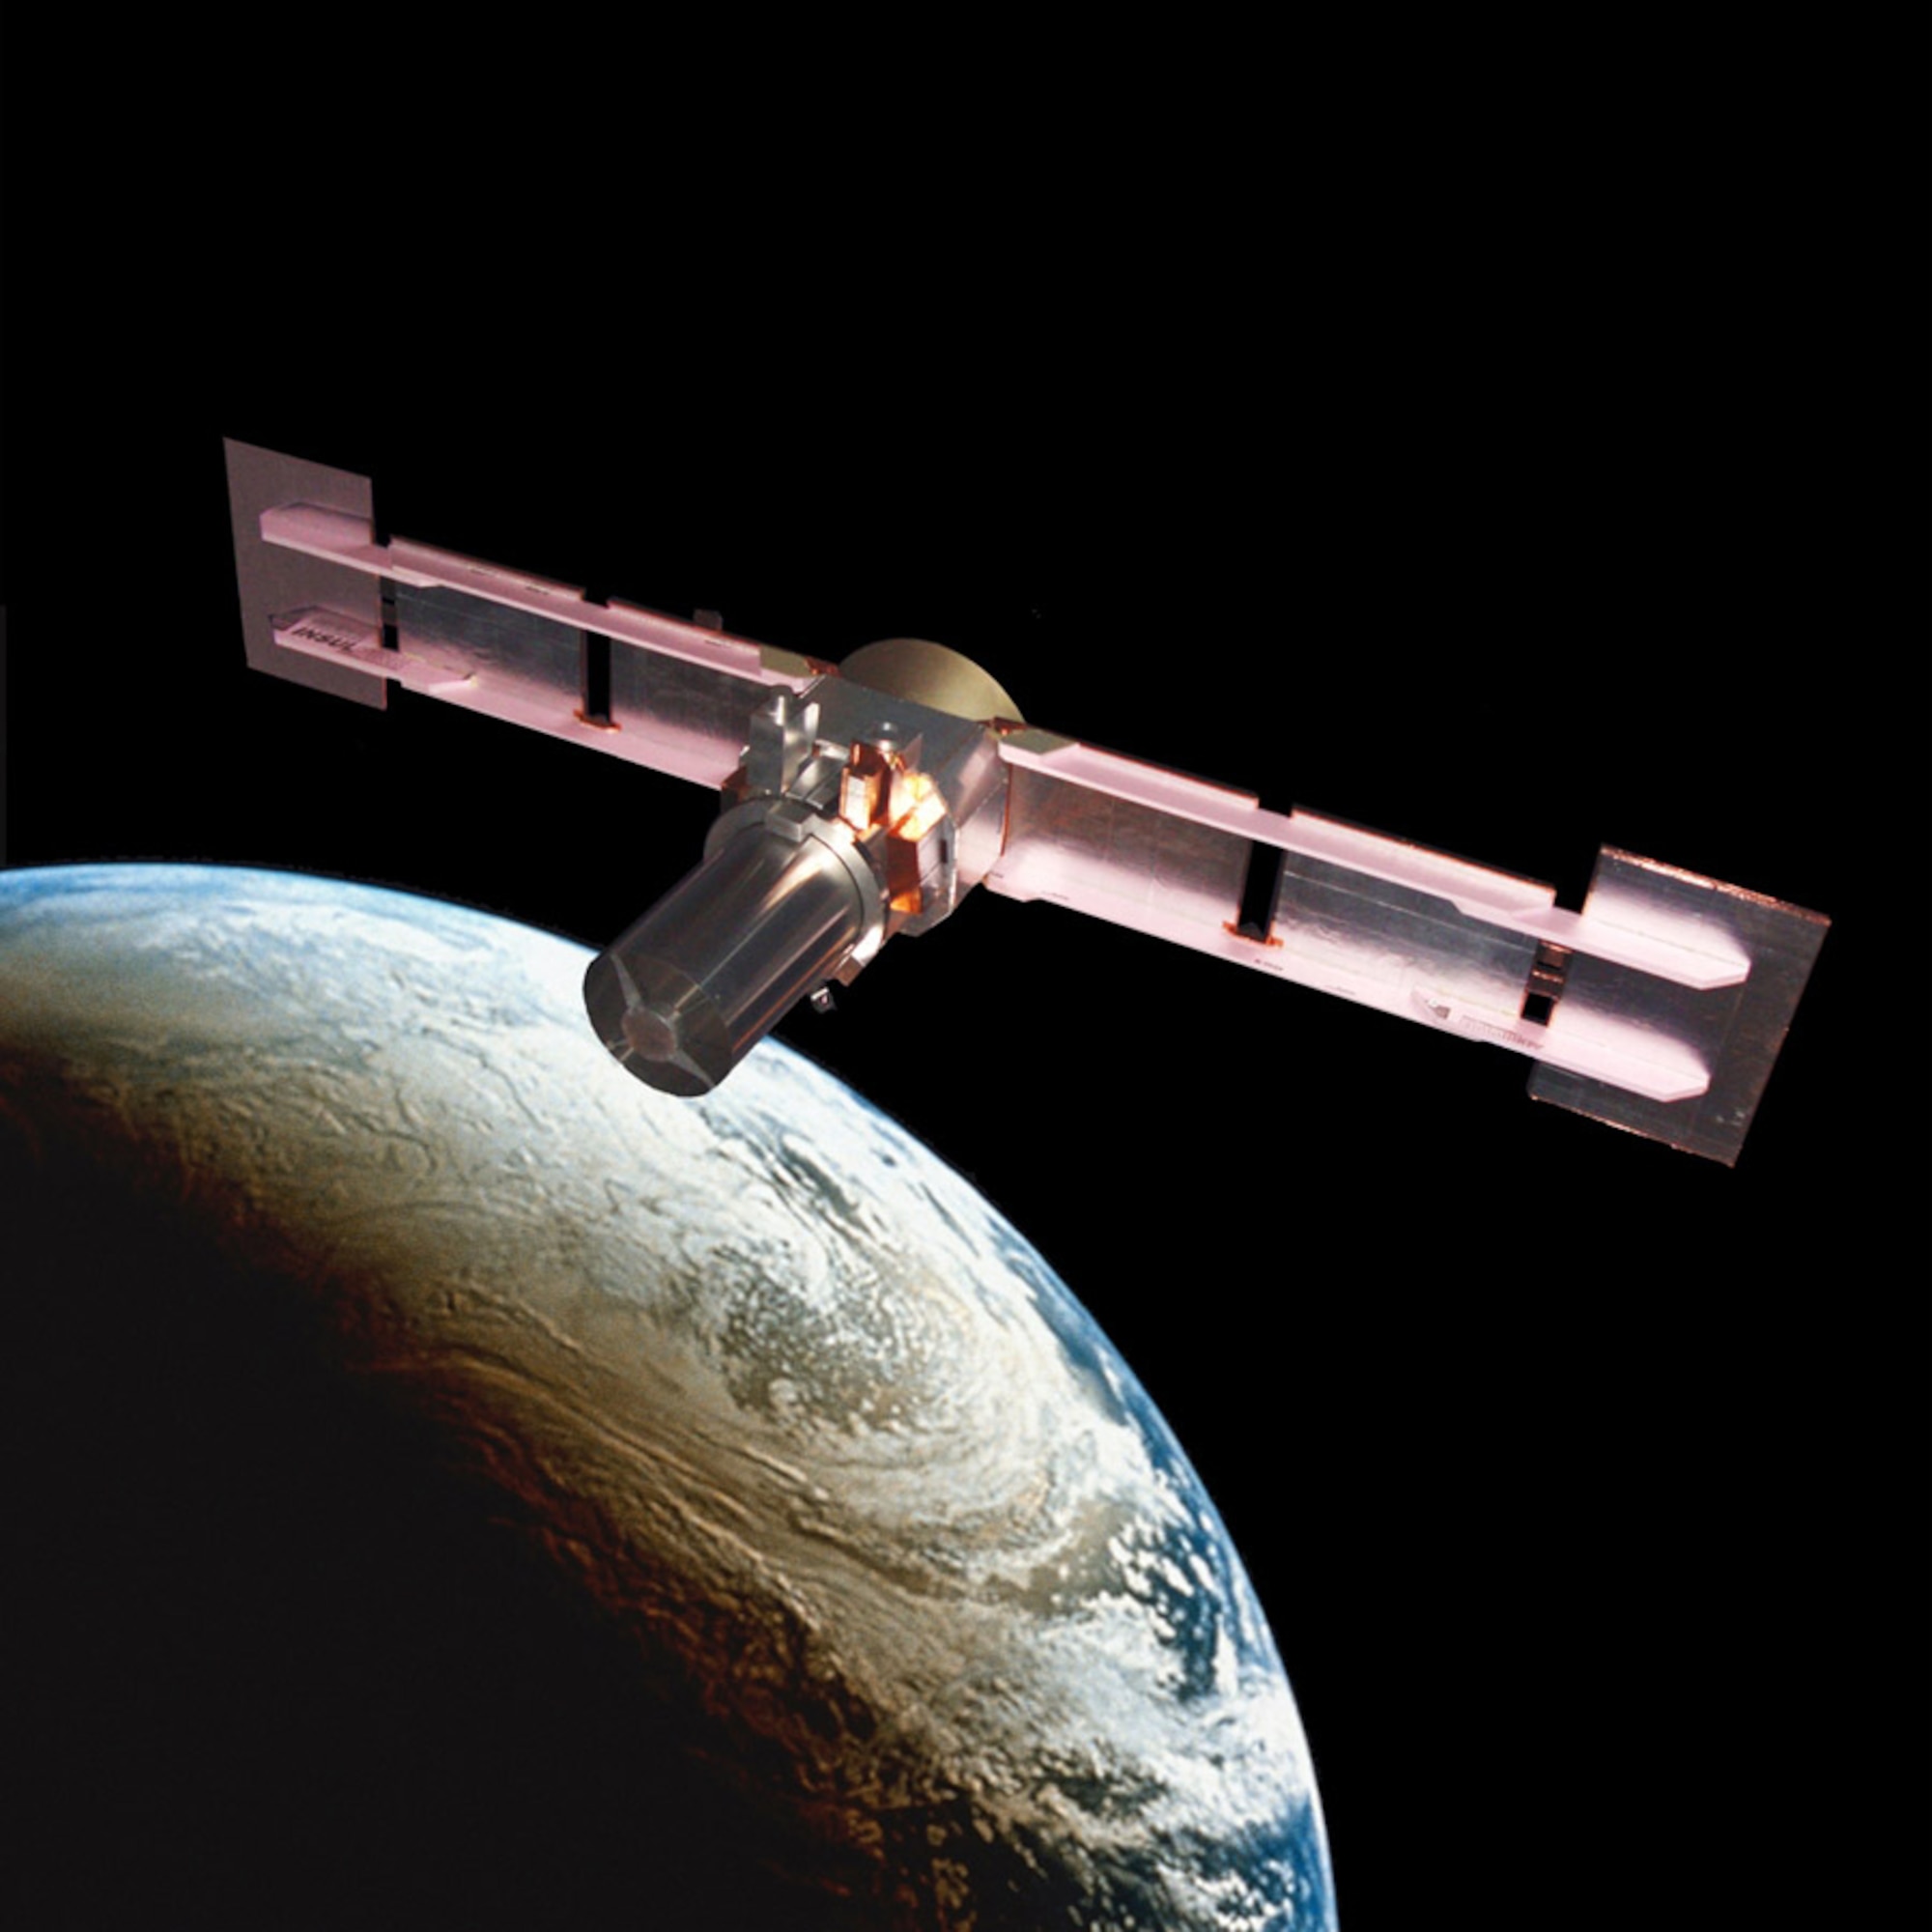 The 6th Space Operations Squadron at Schriever Air Force Base, Colo., will shift its mission focus from the Defense Meteorological Satellite Program to the National Polar-Orbiting Environmental Satellite System beginning in 2013. Pictured here is an NPOESS satellite. (Courtesy illustration/National Oceanographic and Atmospheric Administration)